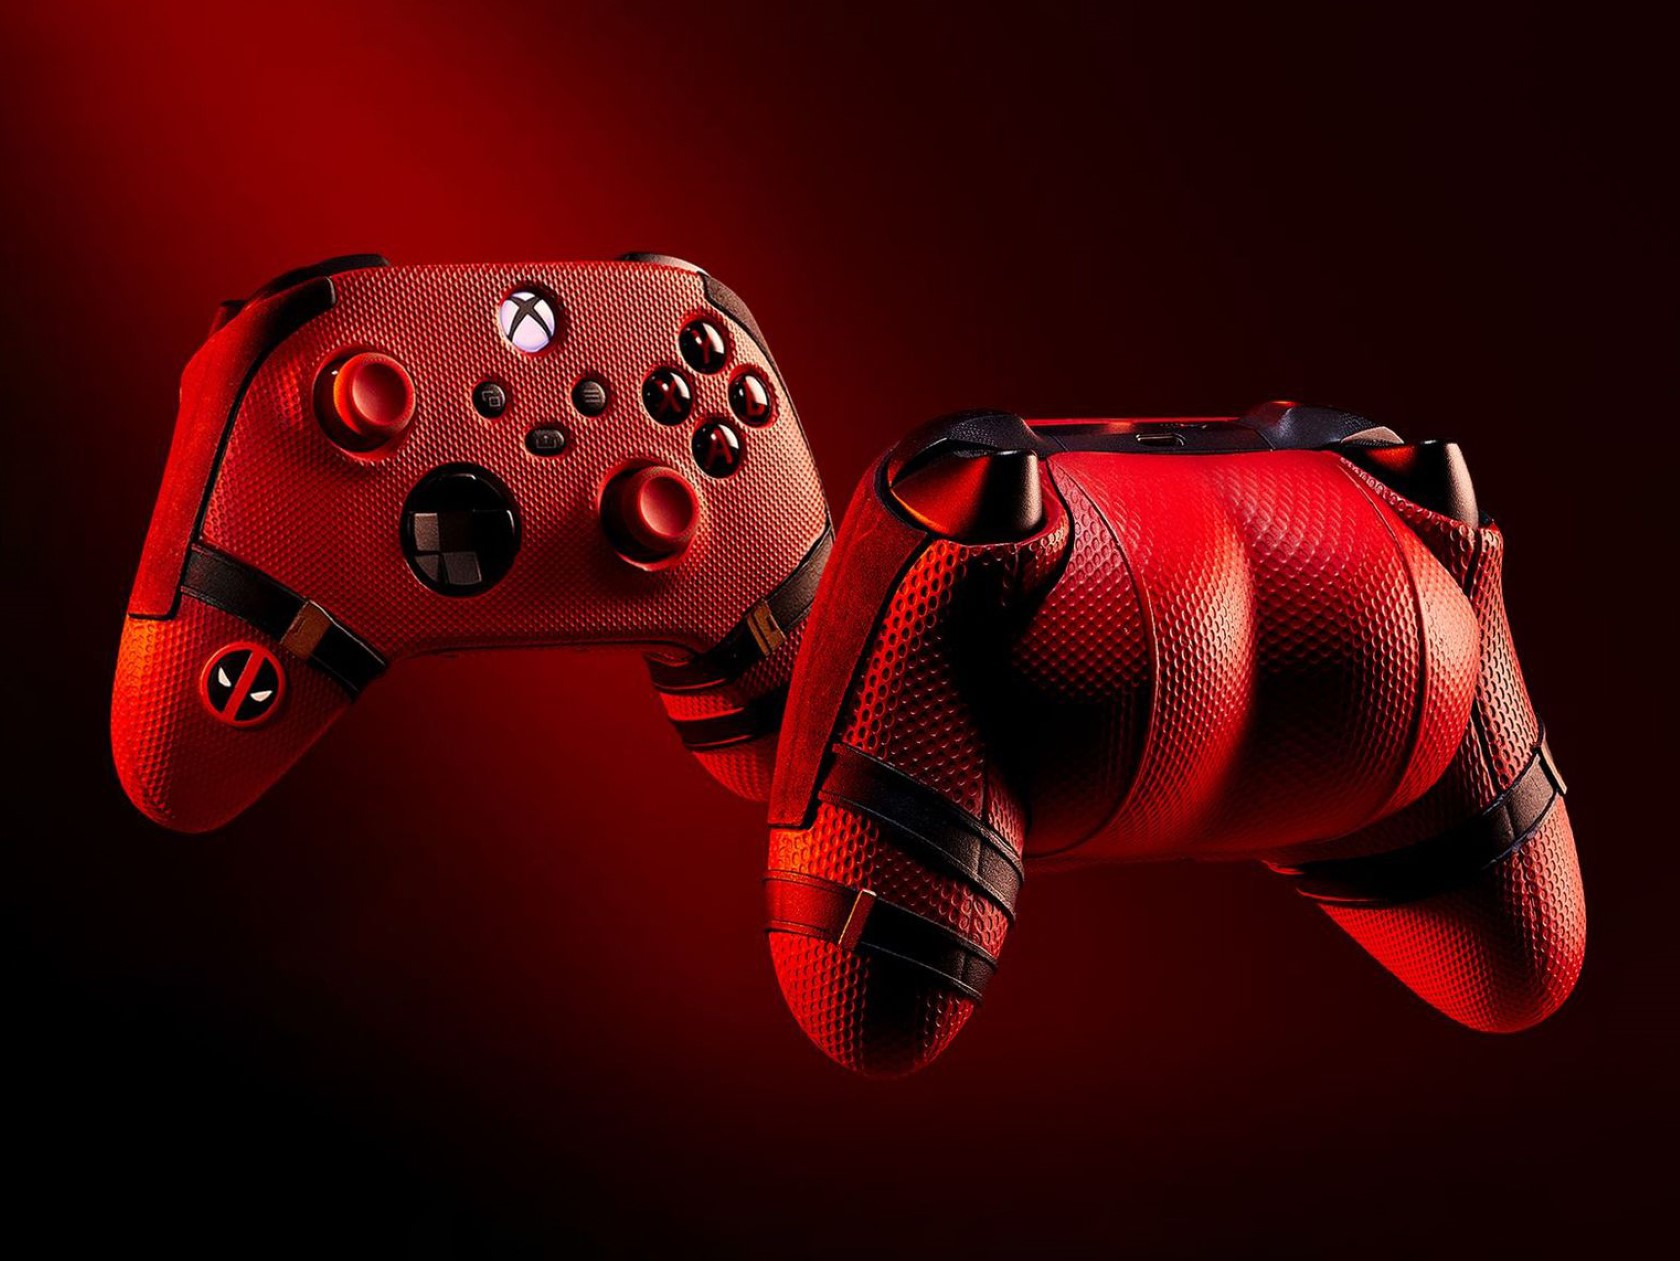 Deadpool and Xbox Launch an *Ahem* Ergonomic Limited Edition Controller with a 'Cheeky' Design (2 minute read)